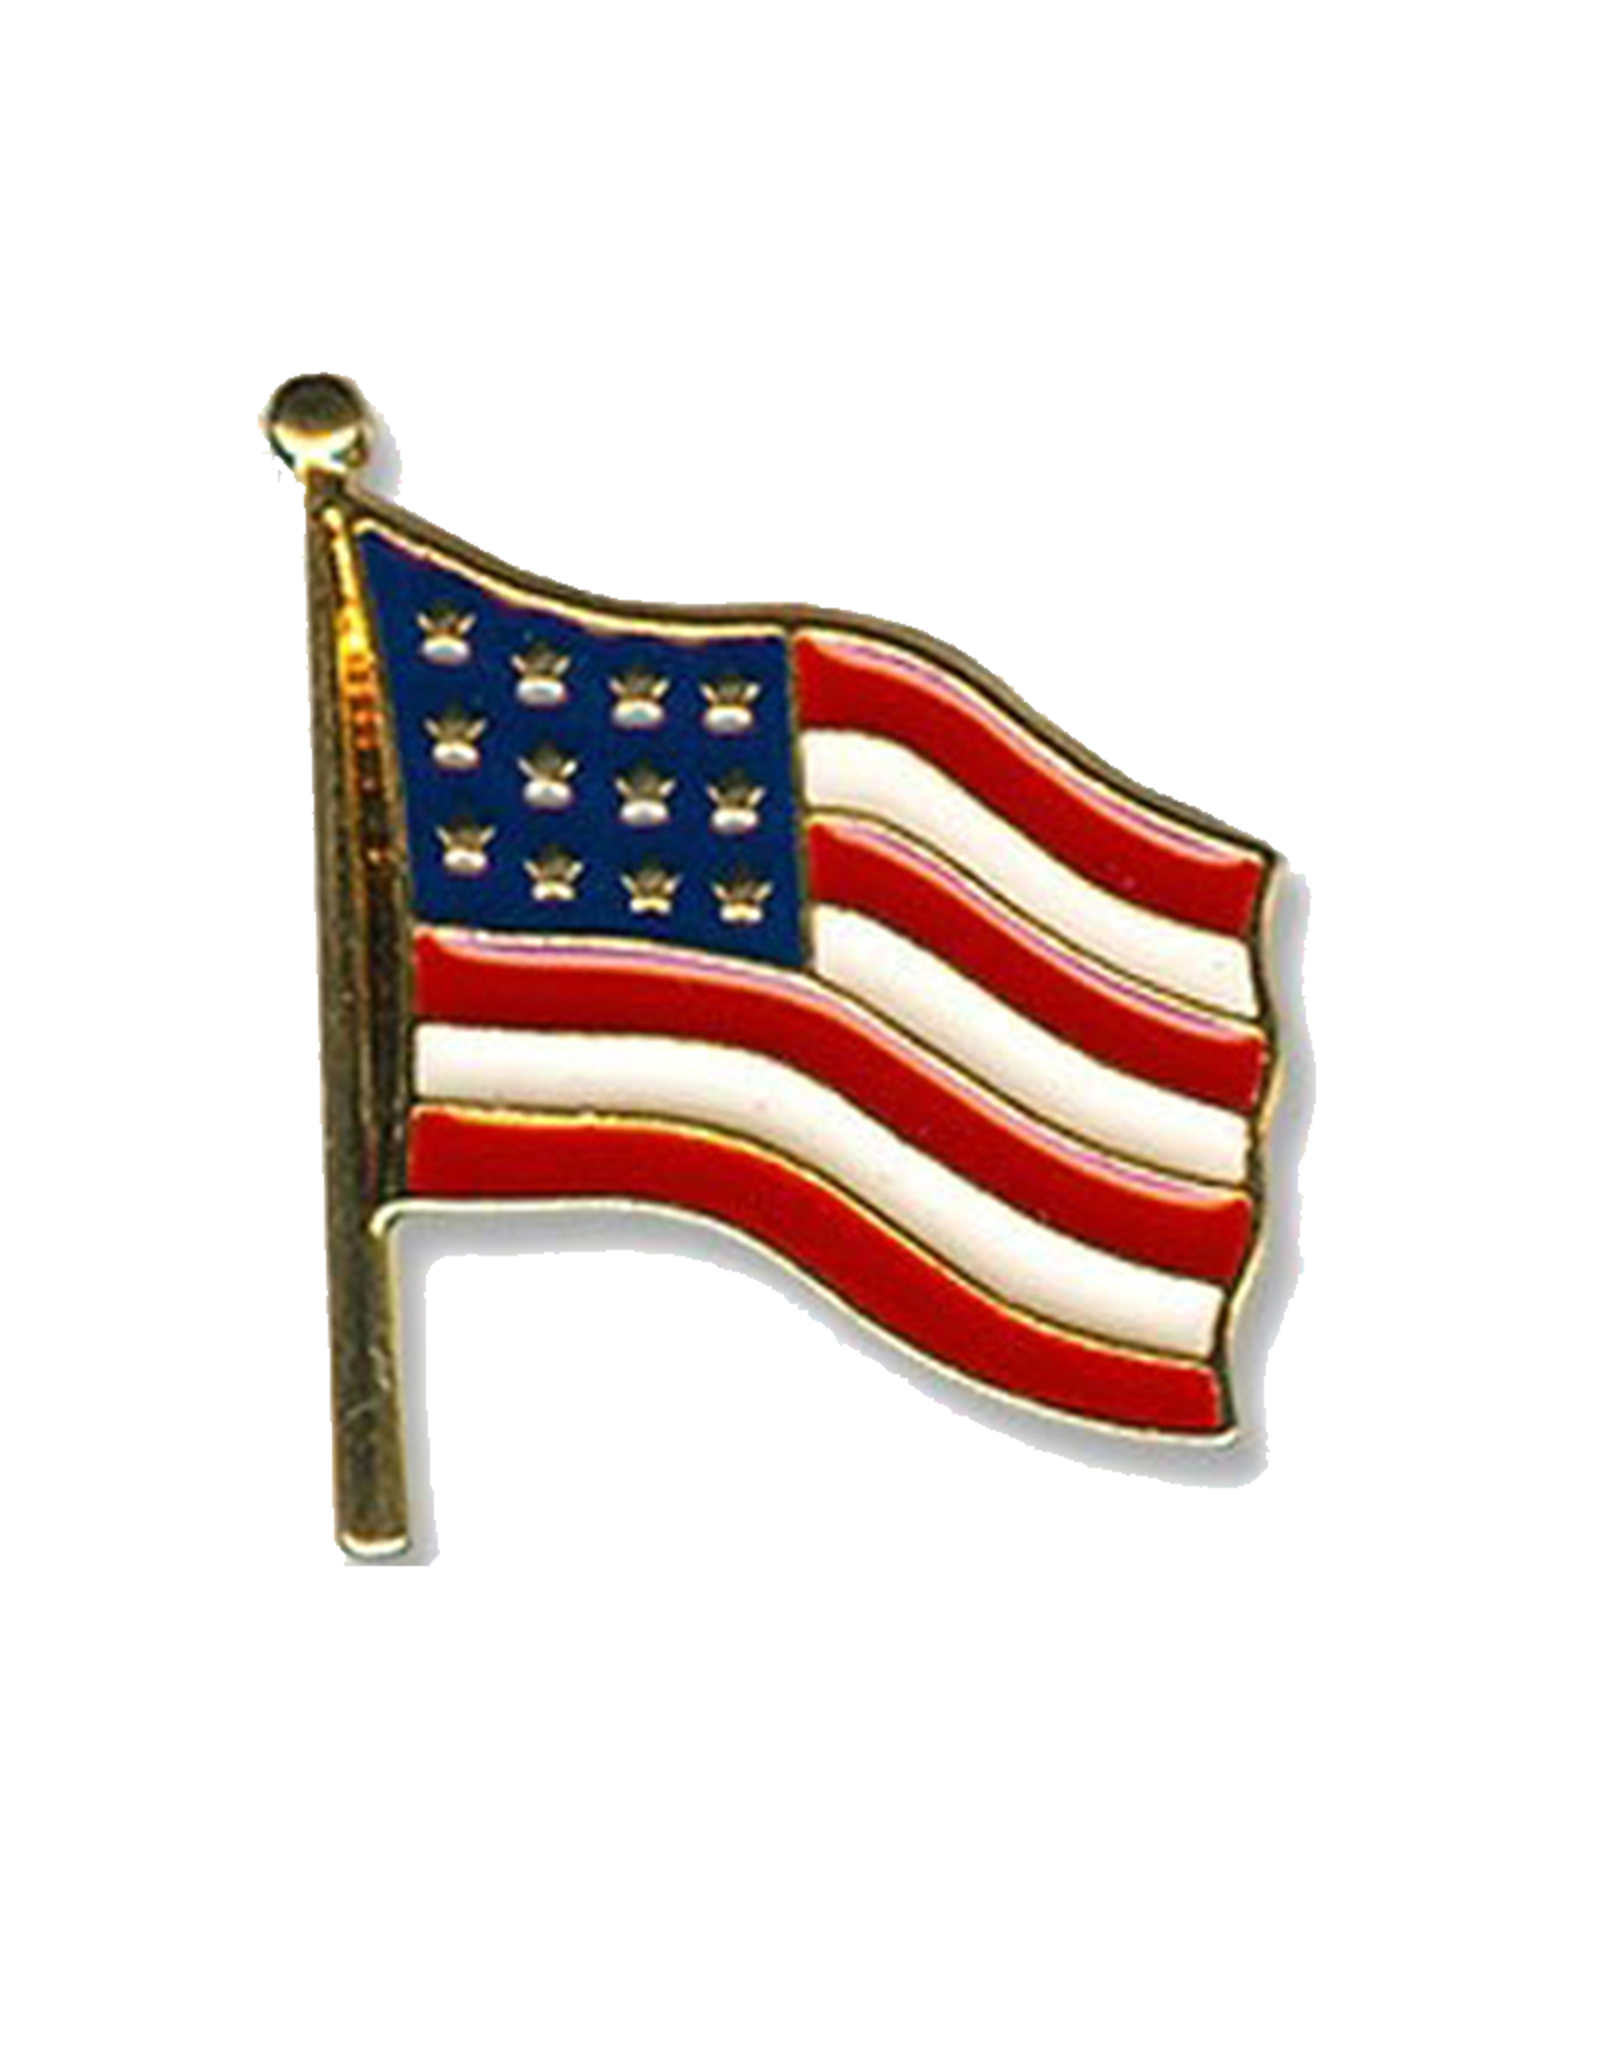 DMM Gifts U.S.A. Flag Tack Pin Made in the USA layered in 18K Enamel Finish